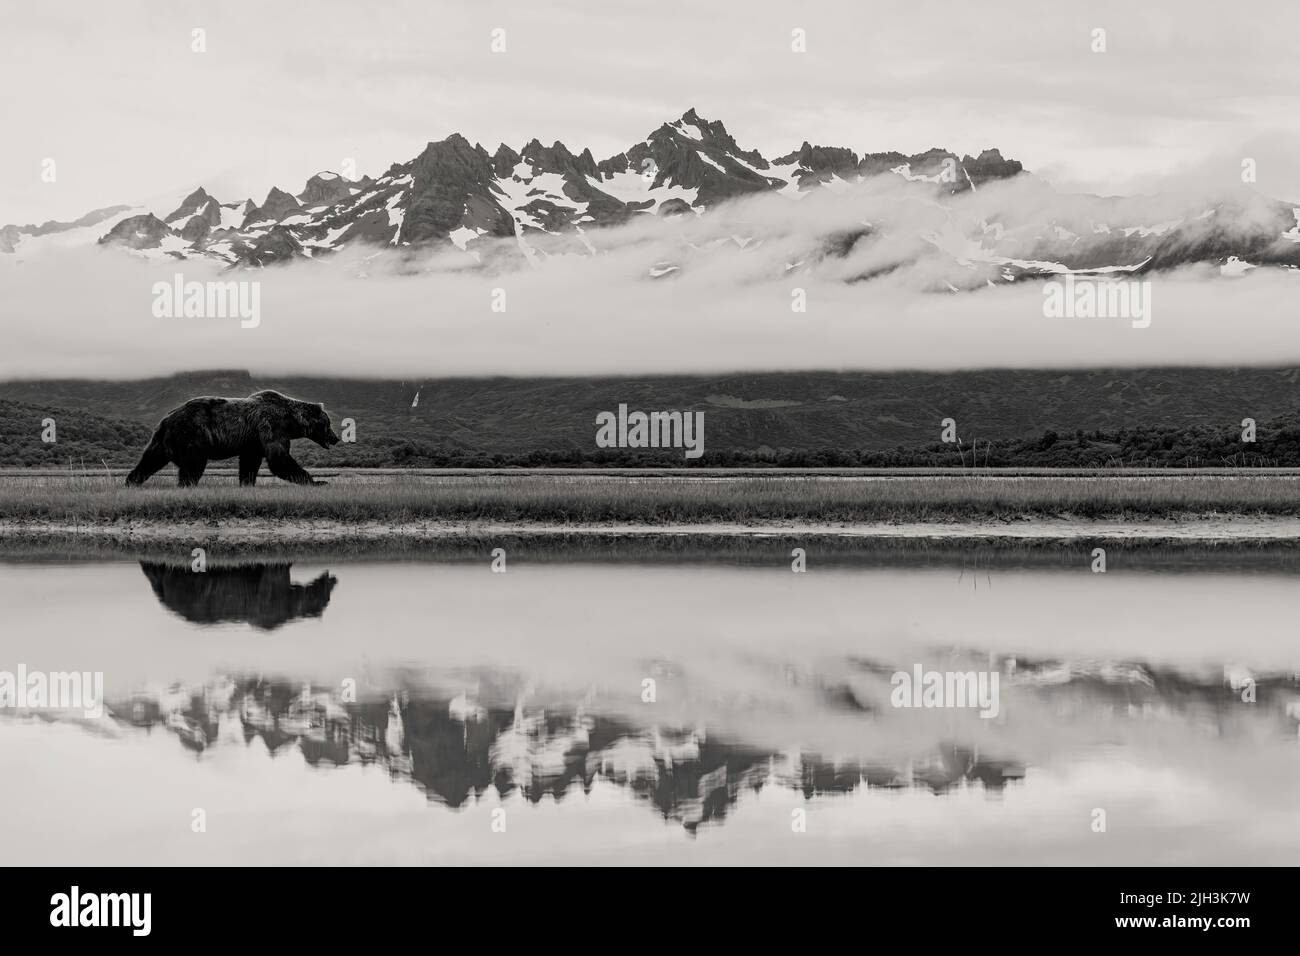 Brown bear walking in front of mountains with reflection Stock Photo